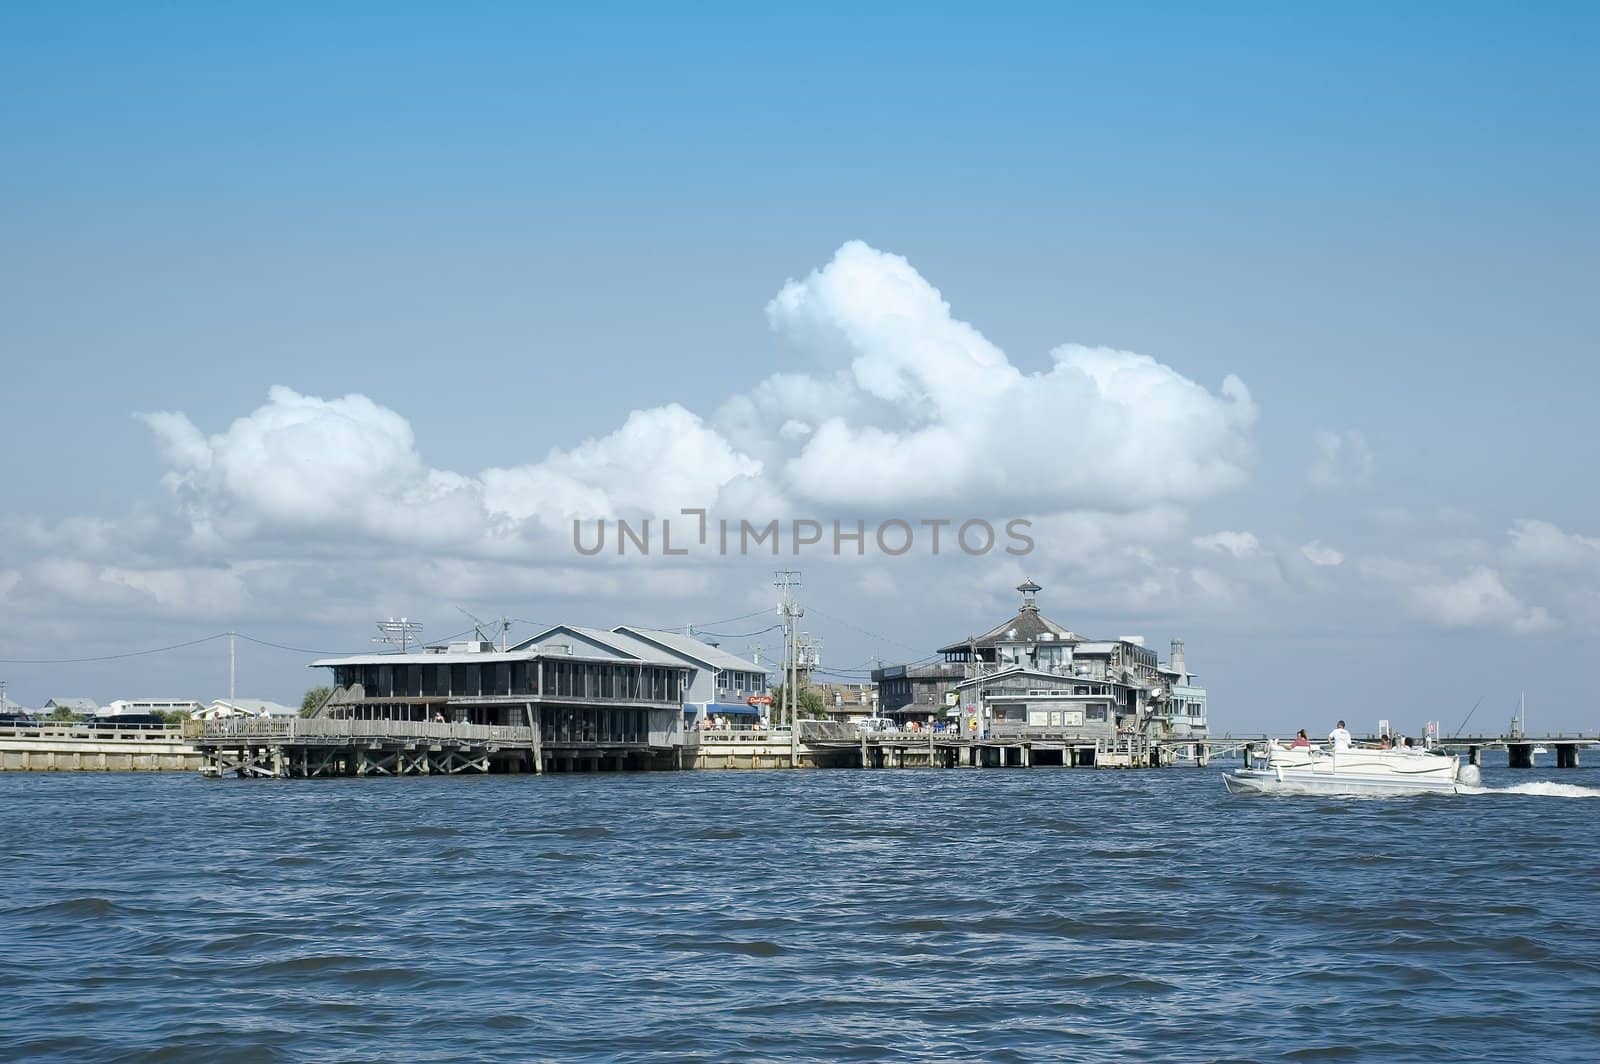 The waterfront at Cedar Key, Florida from the channel in the Gulf of Mexico.